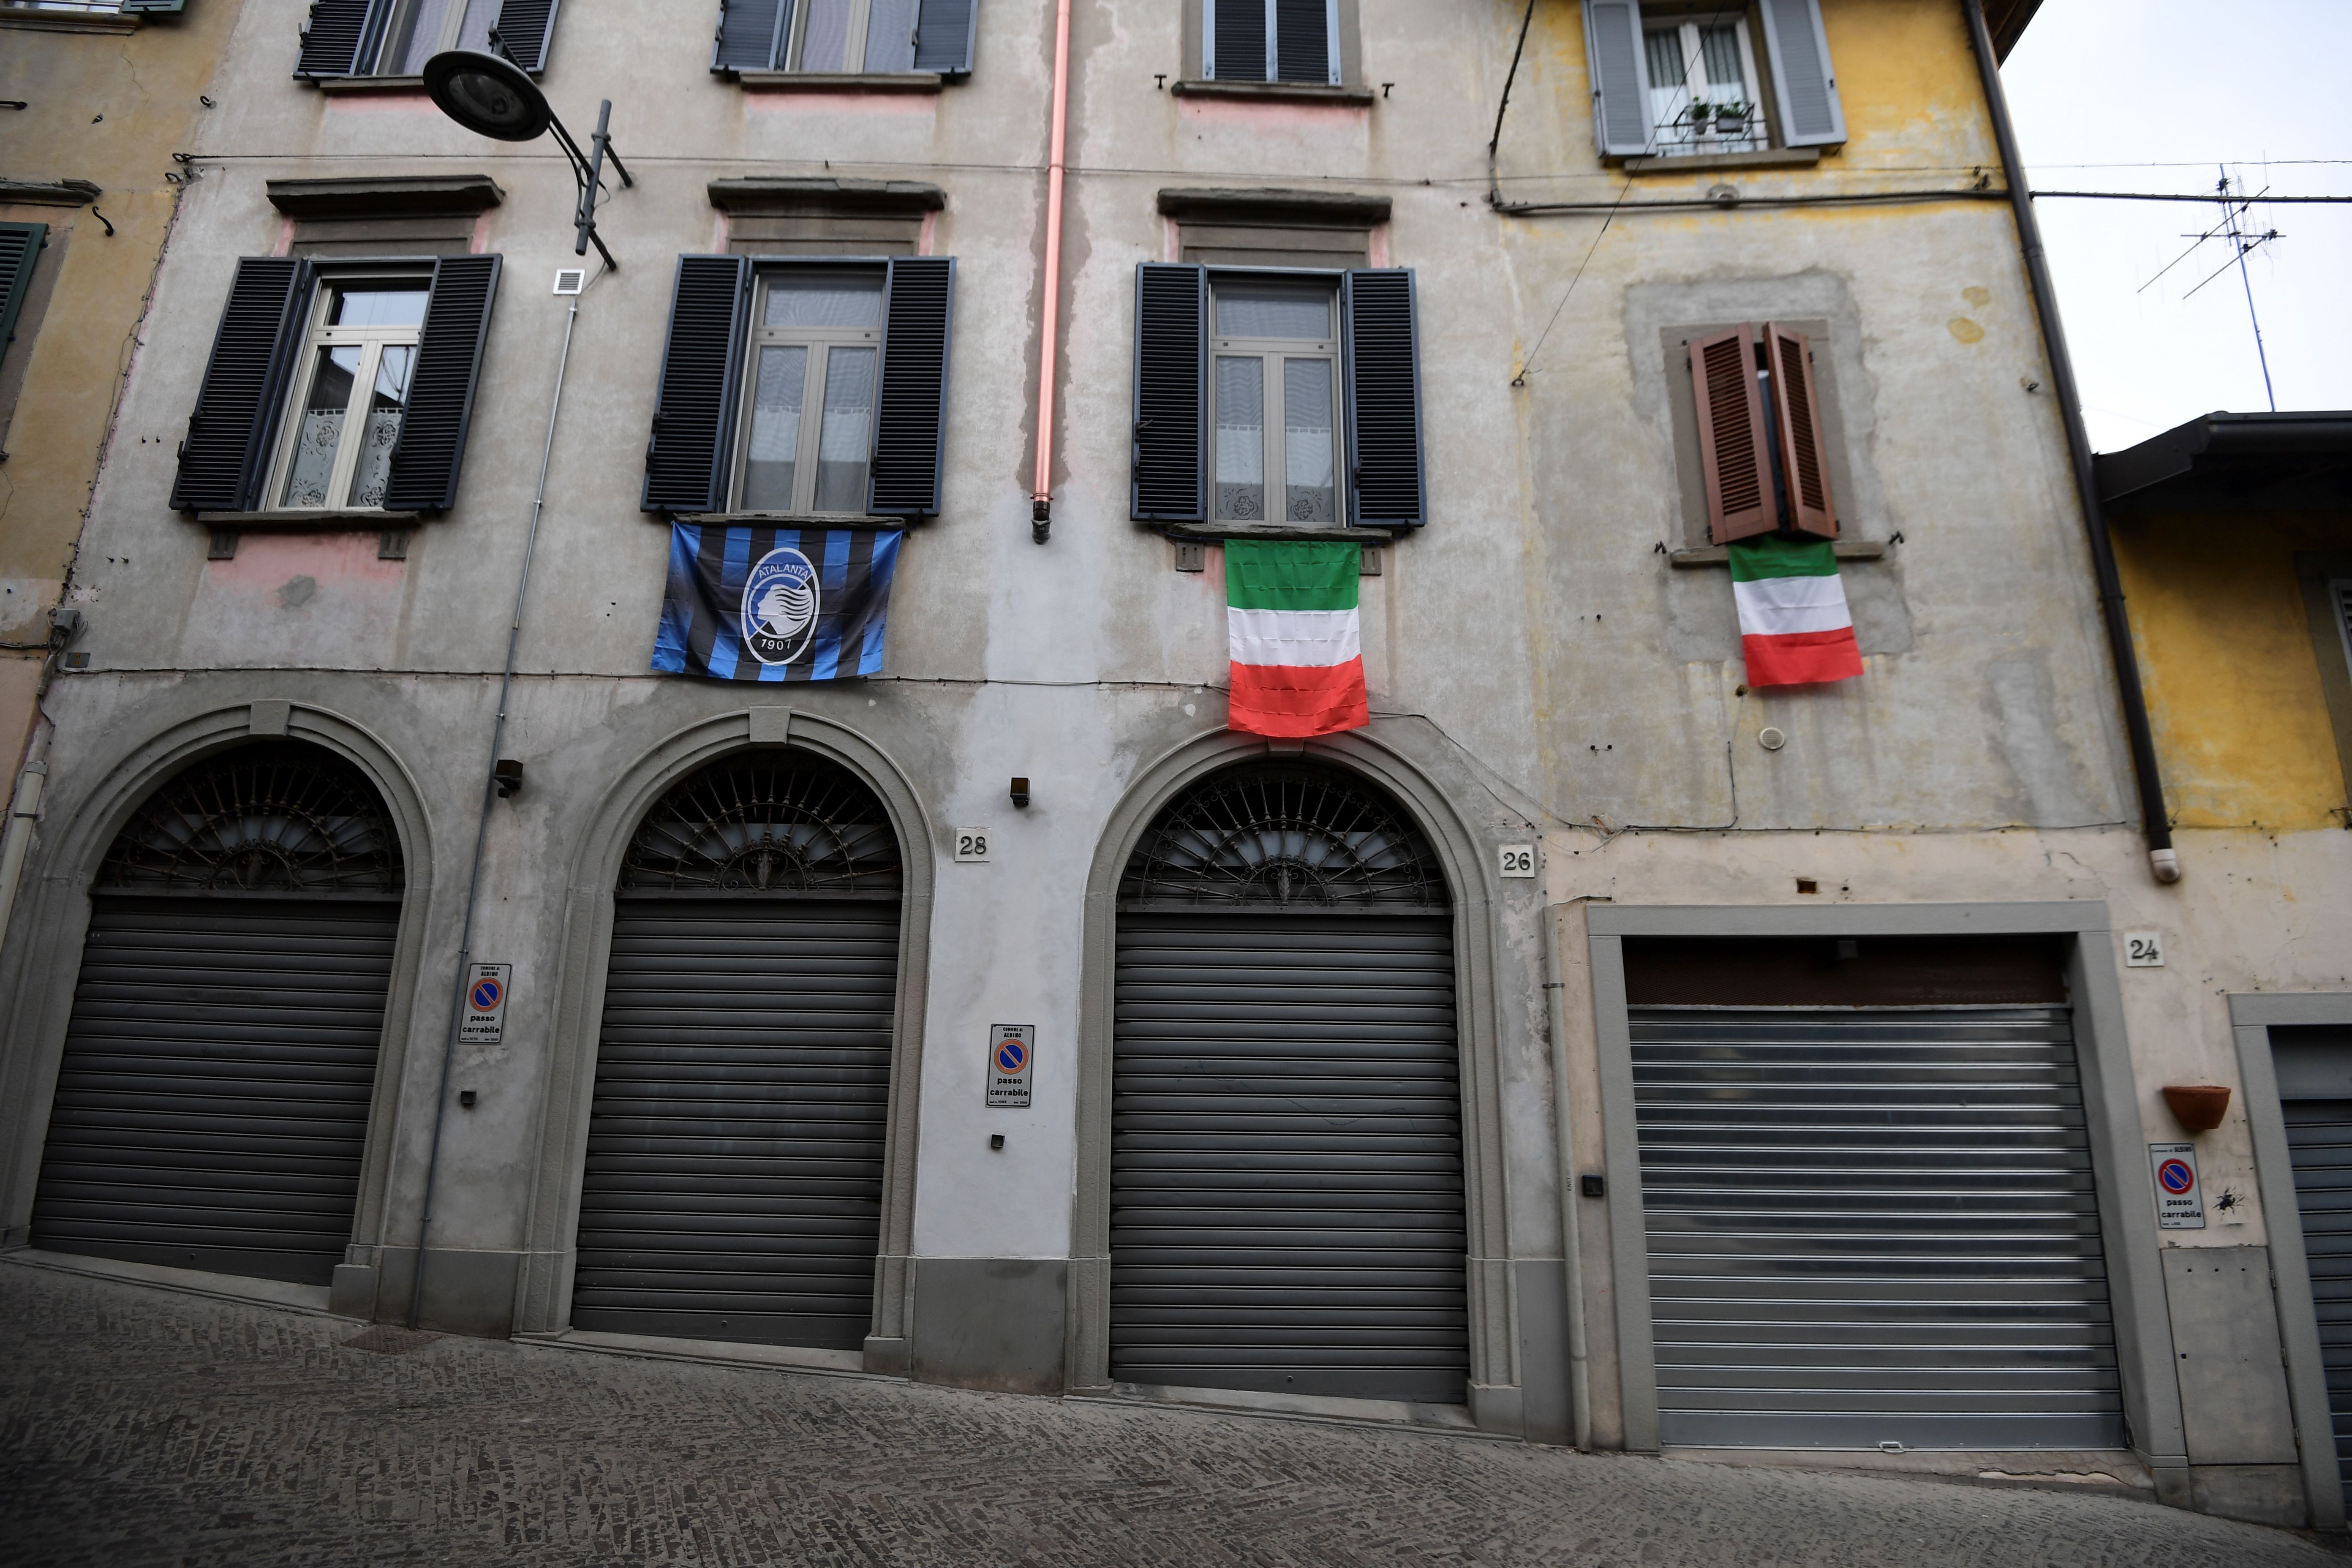 A general view shows Italian flags and an Atalanta Bergamo football team flag (L) hanging over closed shops in a deserted street of Albino near Bergamo, Lombardy, on March 25, 2020, during the country's lockdown following the COVID-19 new coronavirus pandemic. (Photo by MIGUEL MEDINA/AFP via Getty Images)